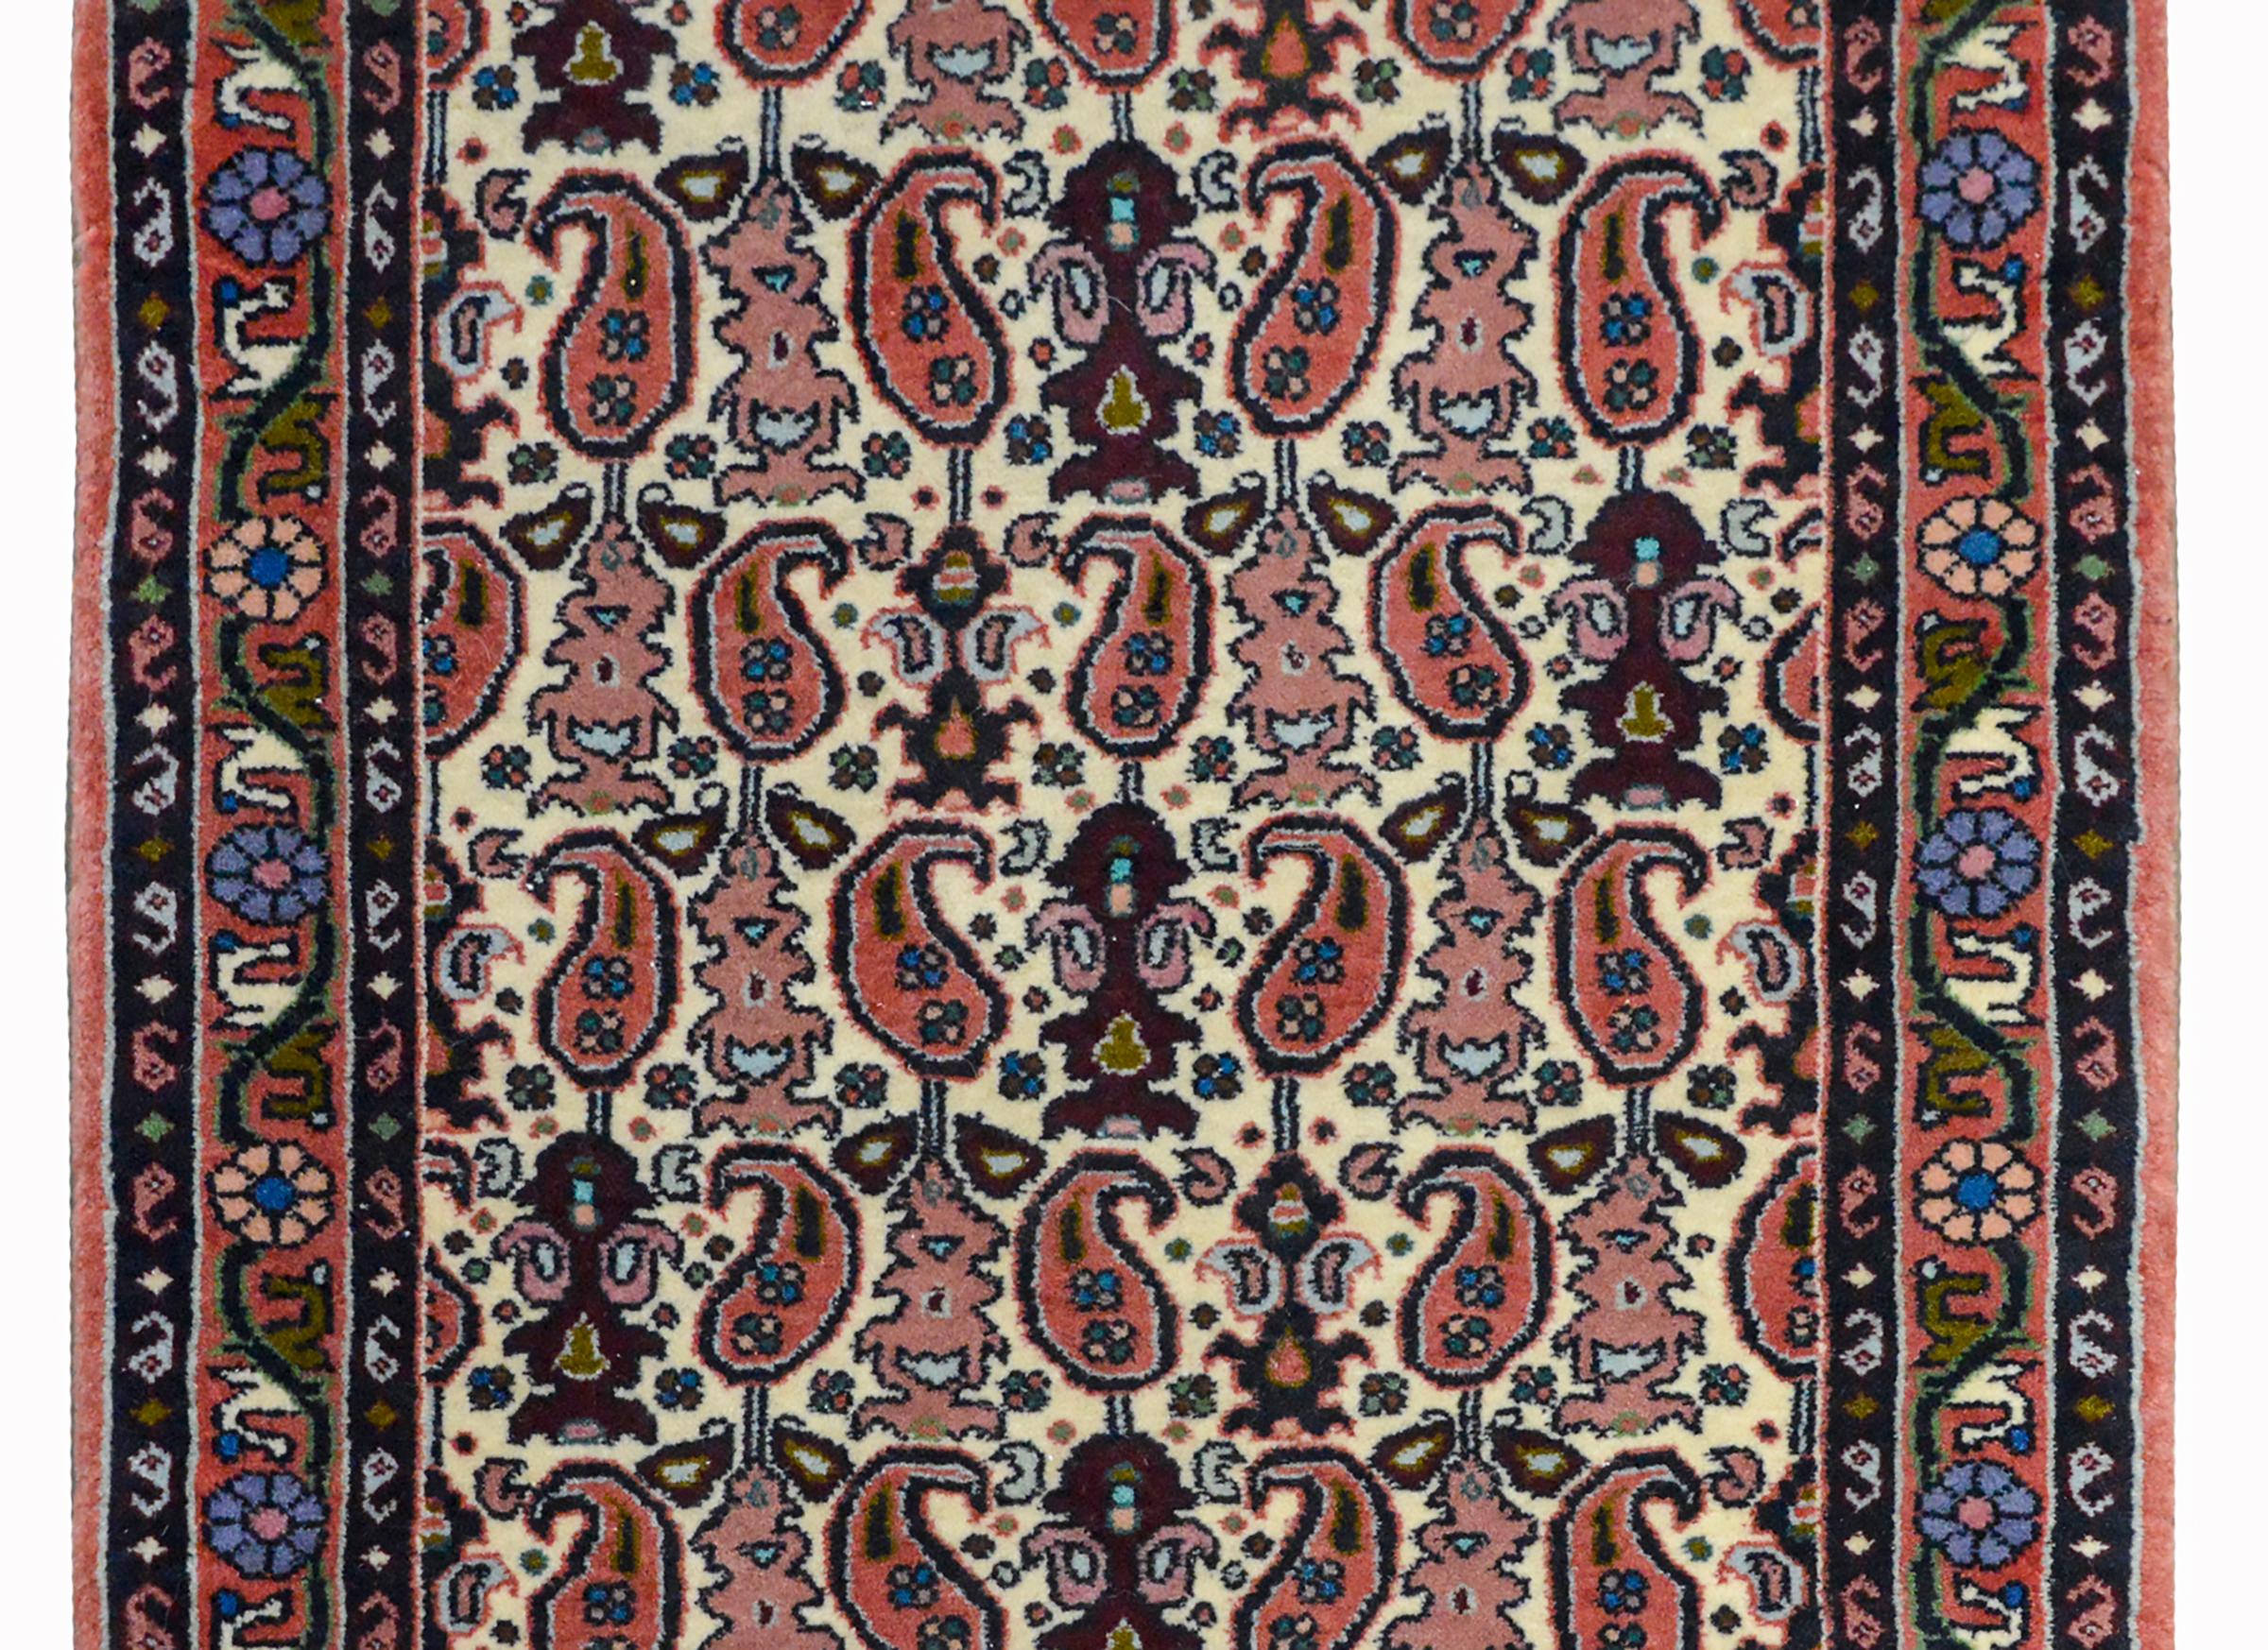 A wonderful vintage petite Persian Bidjar rug with an all-over paisley pattern woven in dark and light red, light indigo, and green against a cream colored background. The border is sweet, with a floral and scrolling vine flanked by a pair of petite